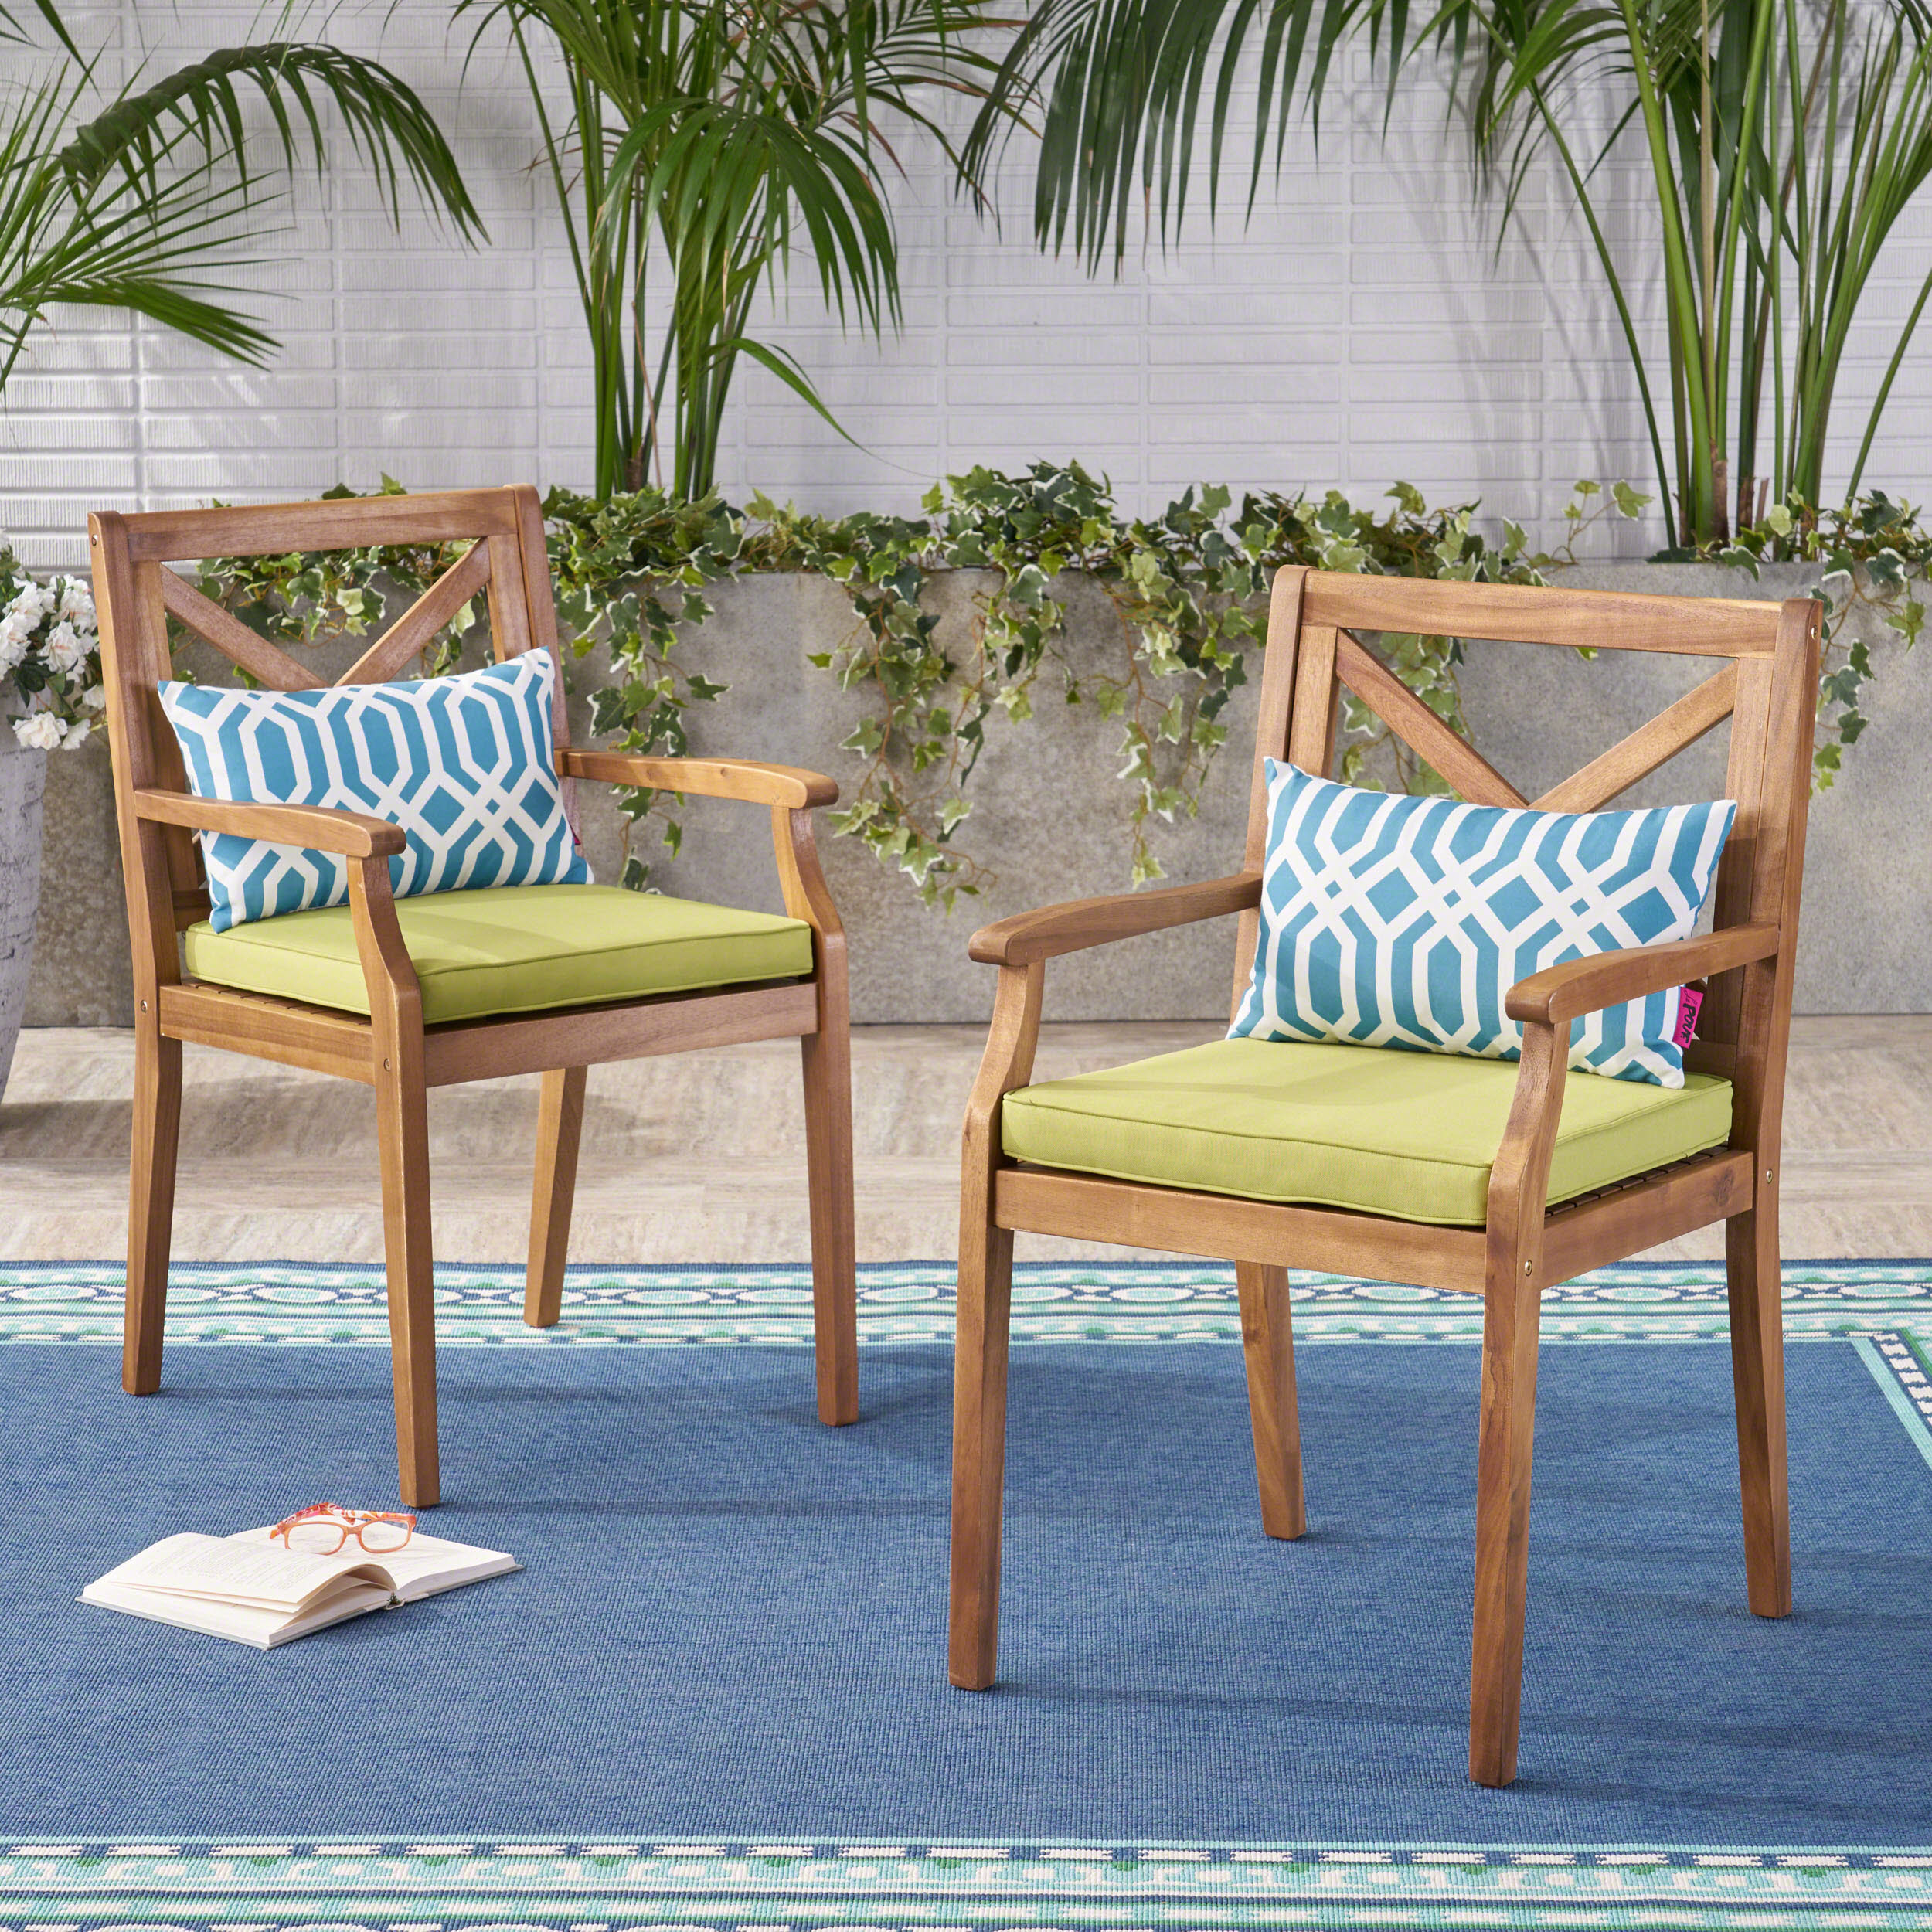 Outdoor Acacia Wood Dining Chair with Cushions, Teak,Green - image 1 of 6